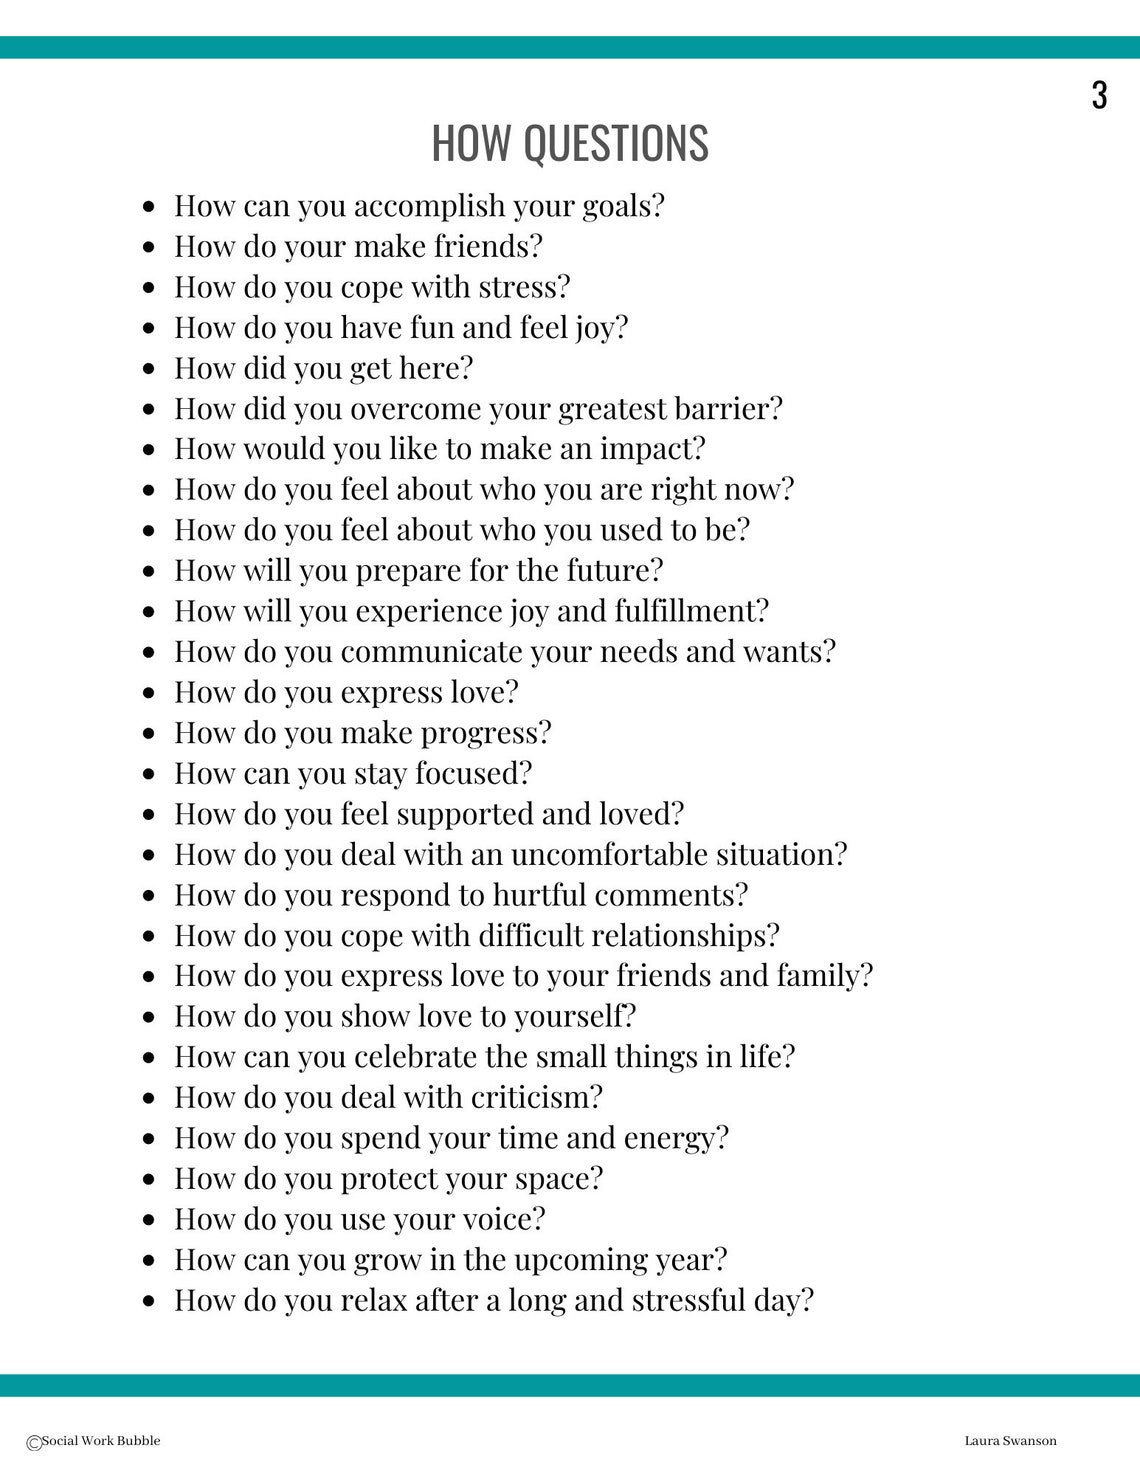 Icebreaker Questions for Teenagers in Therapy Get to Know Me - Etsy